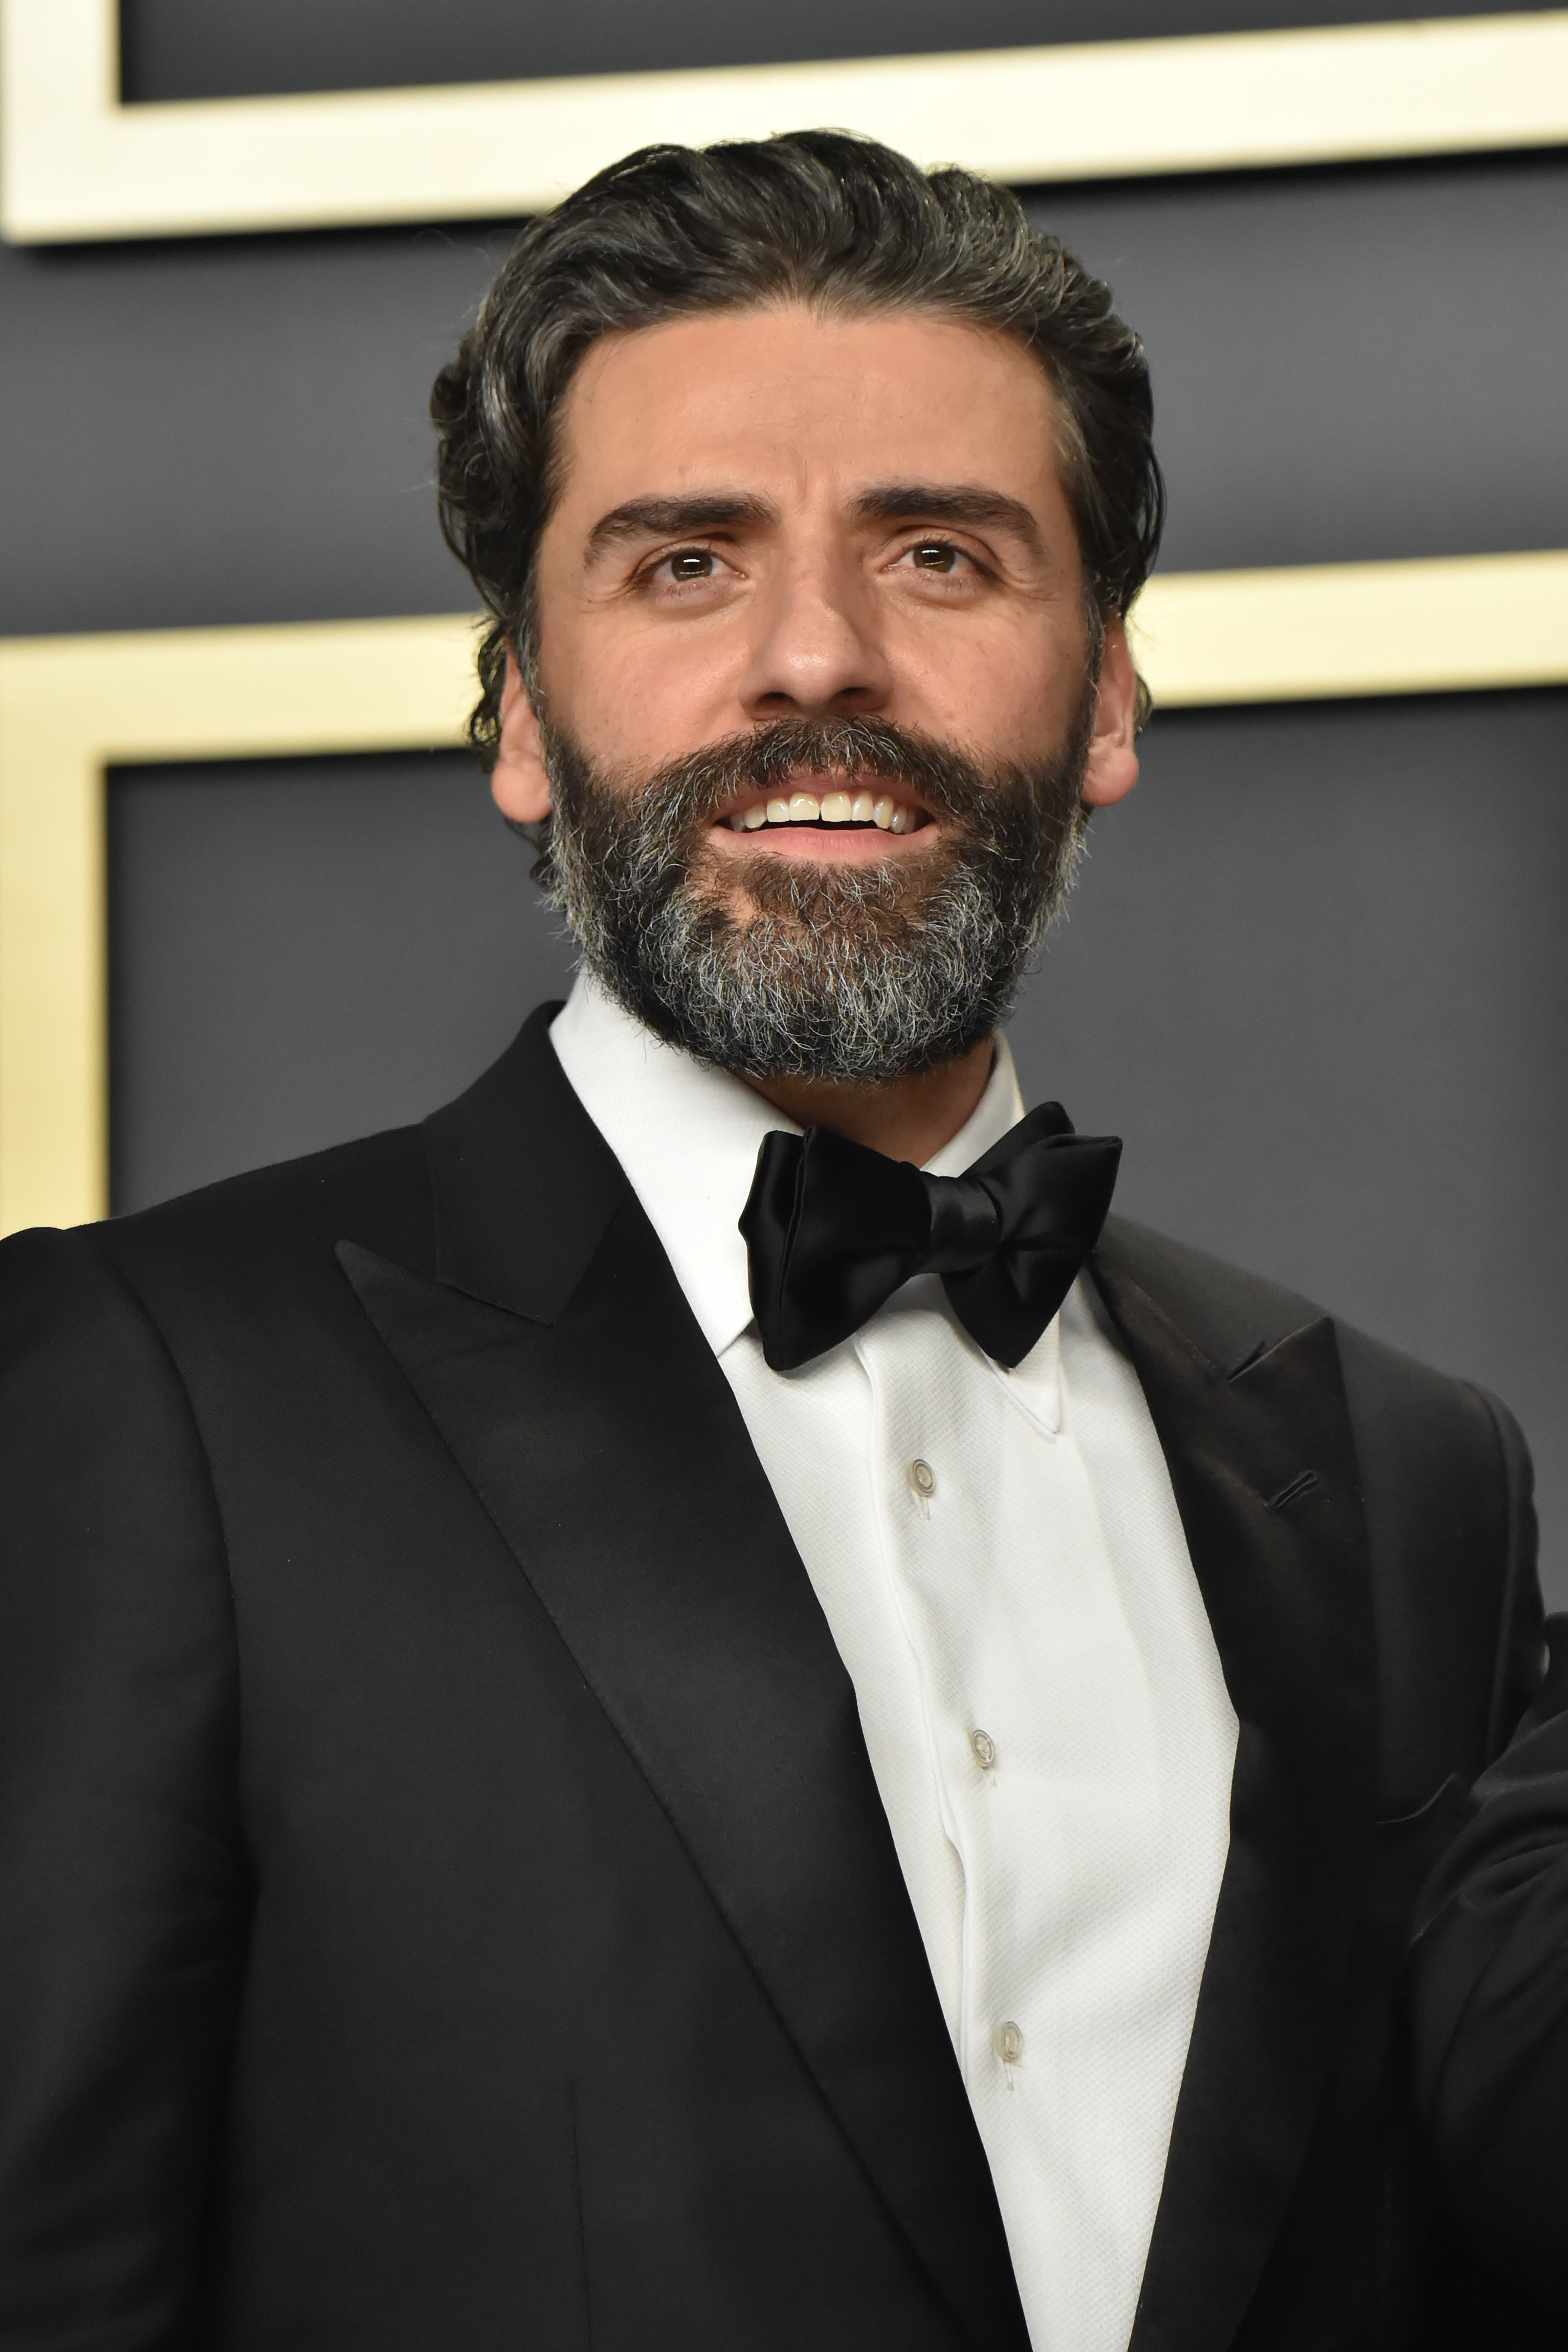 Isaac at the Oscars in 2020